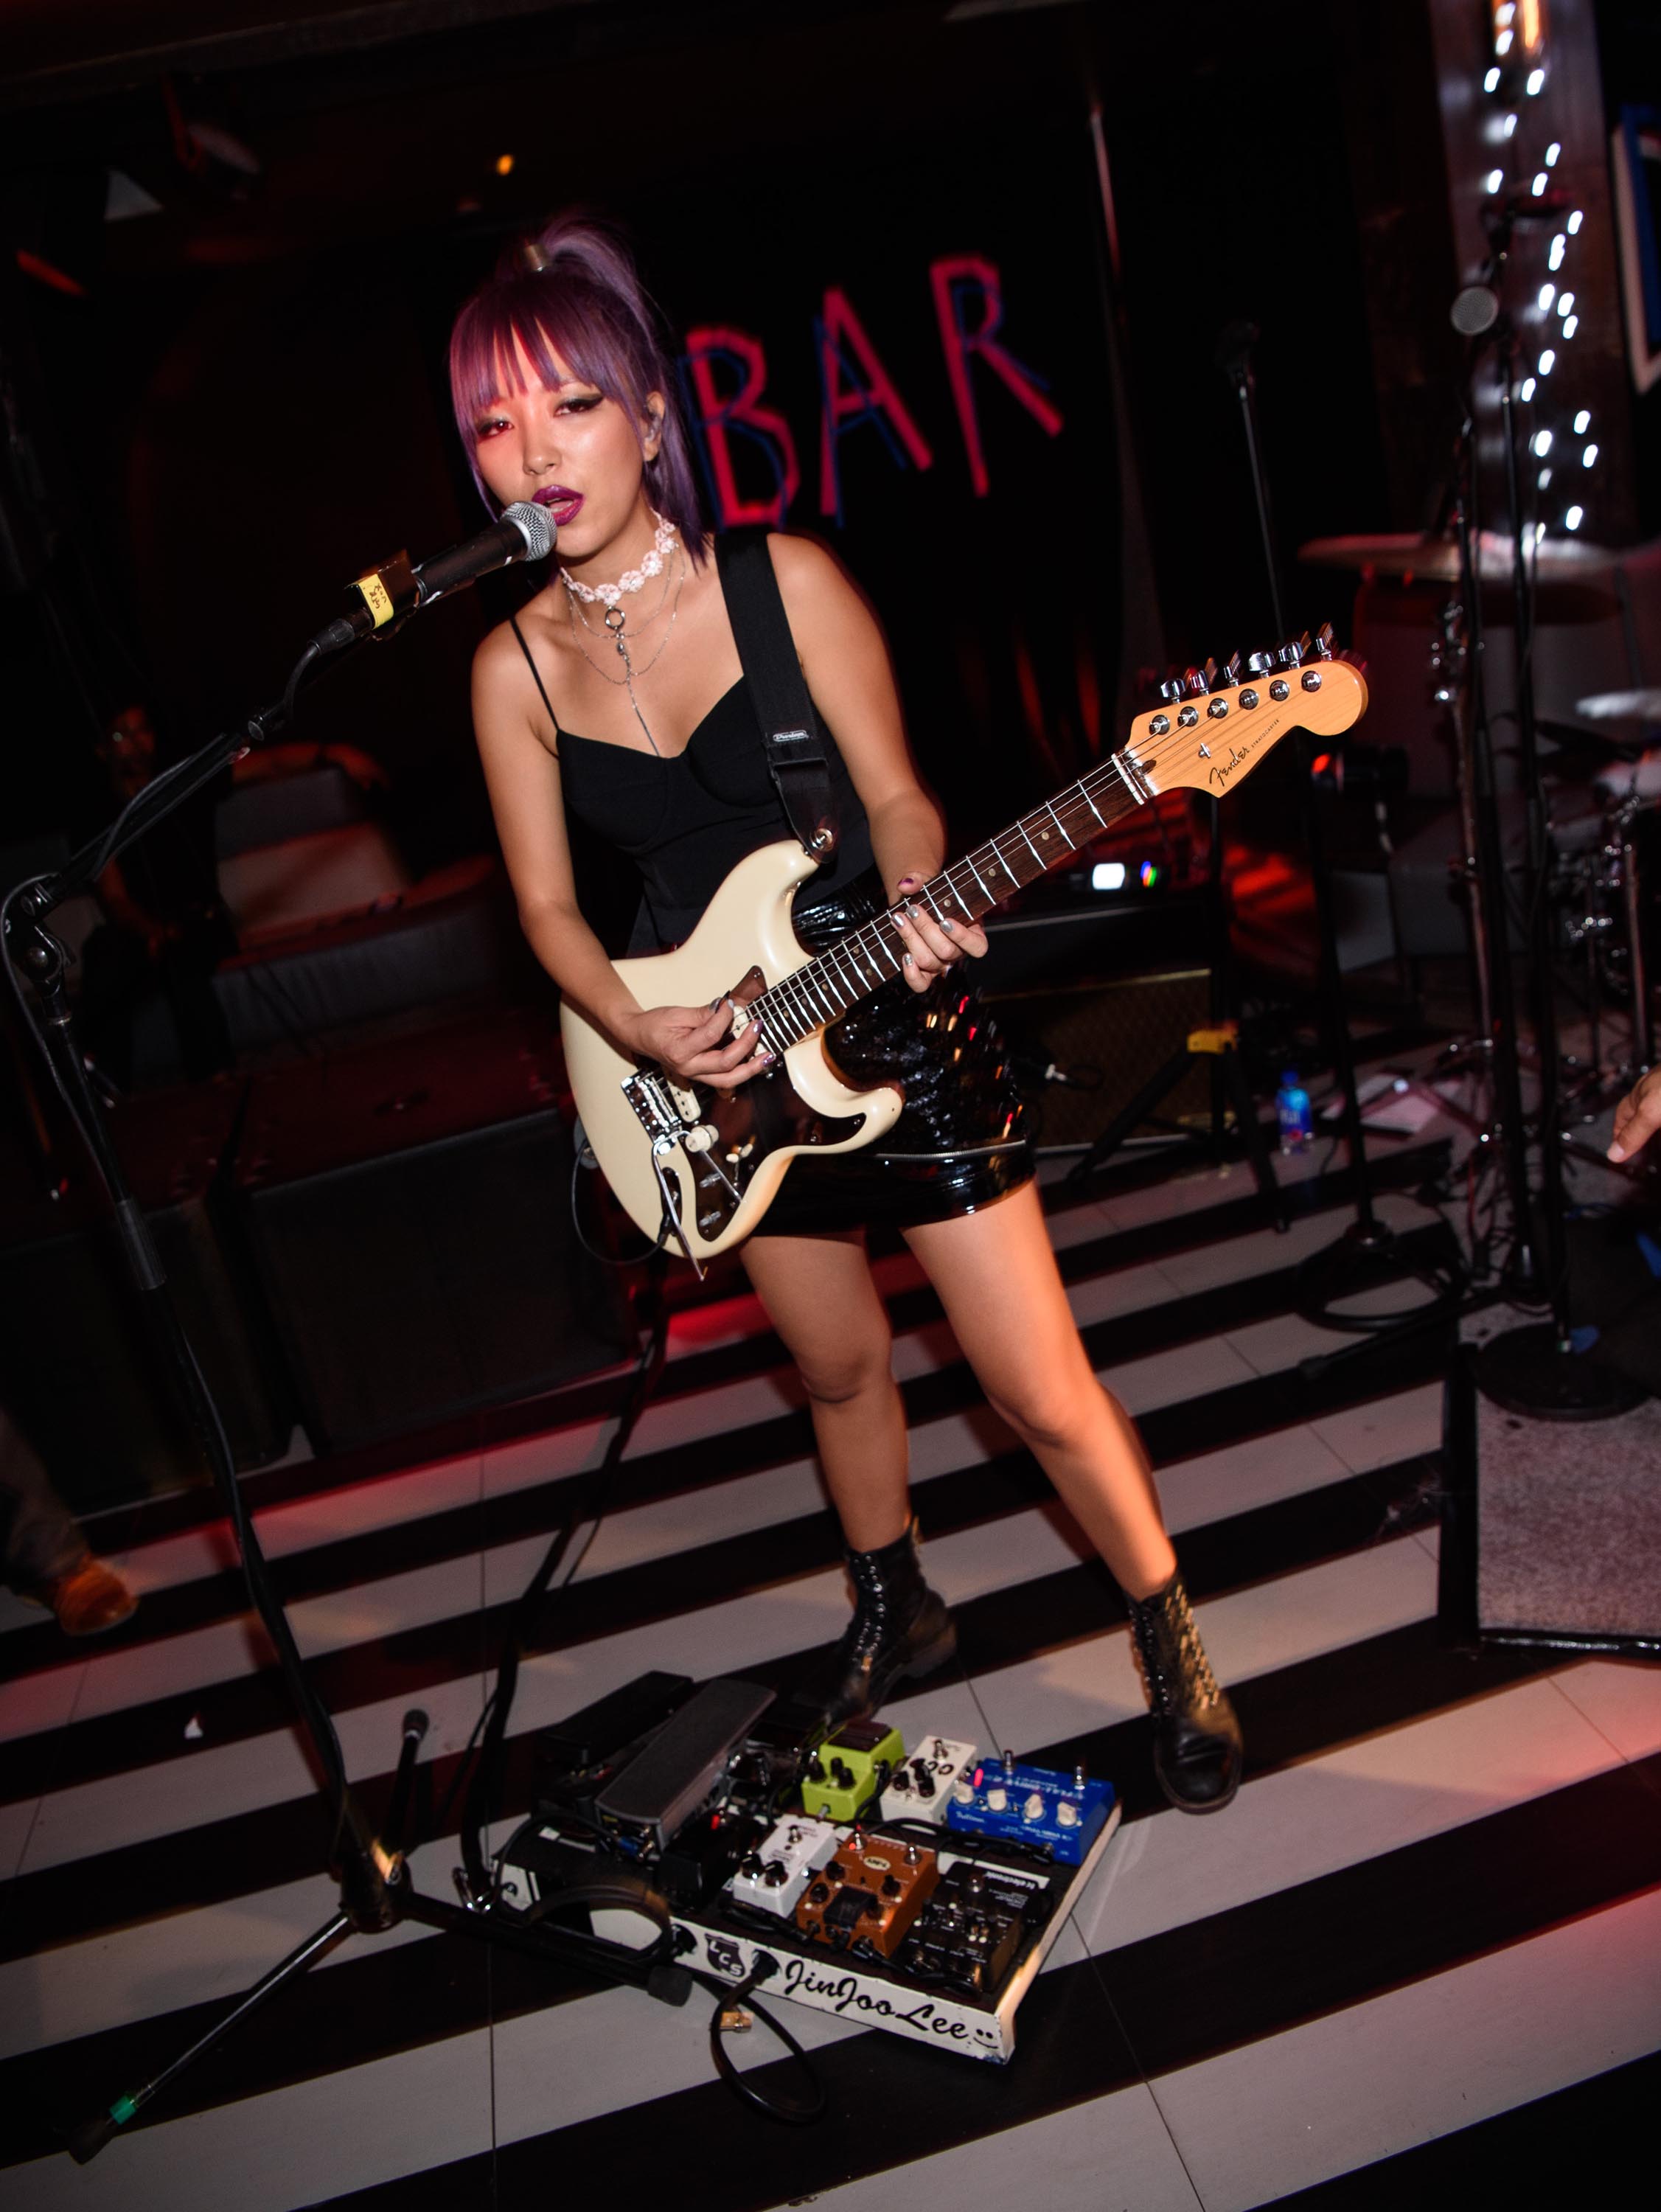 JinJoo Lee performs at the One Year Anniversary celebration of of the band DNCE